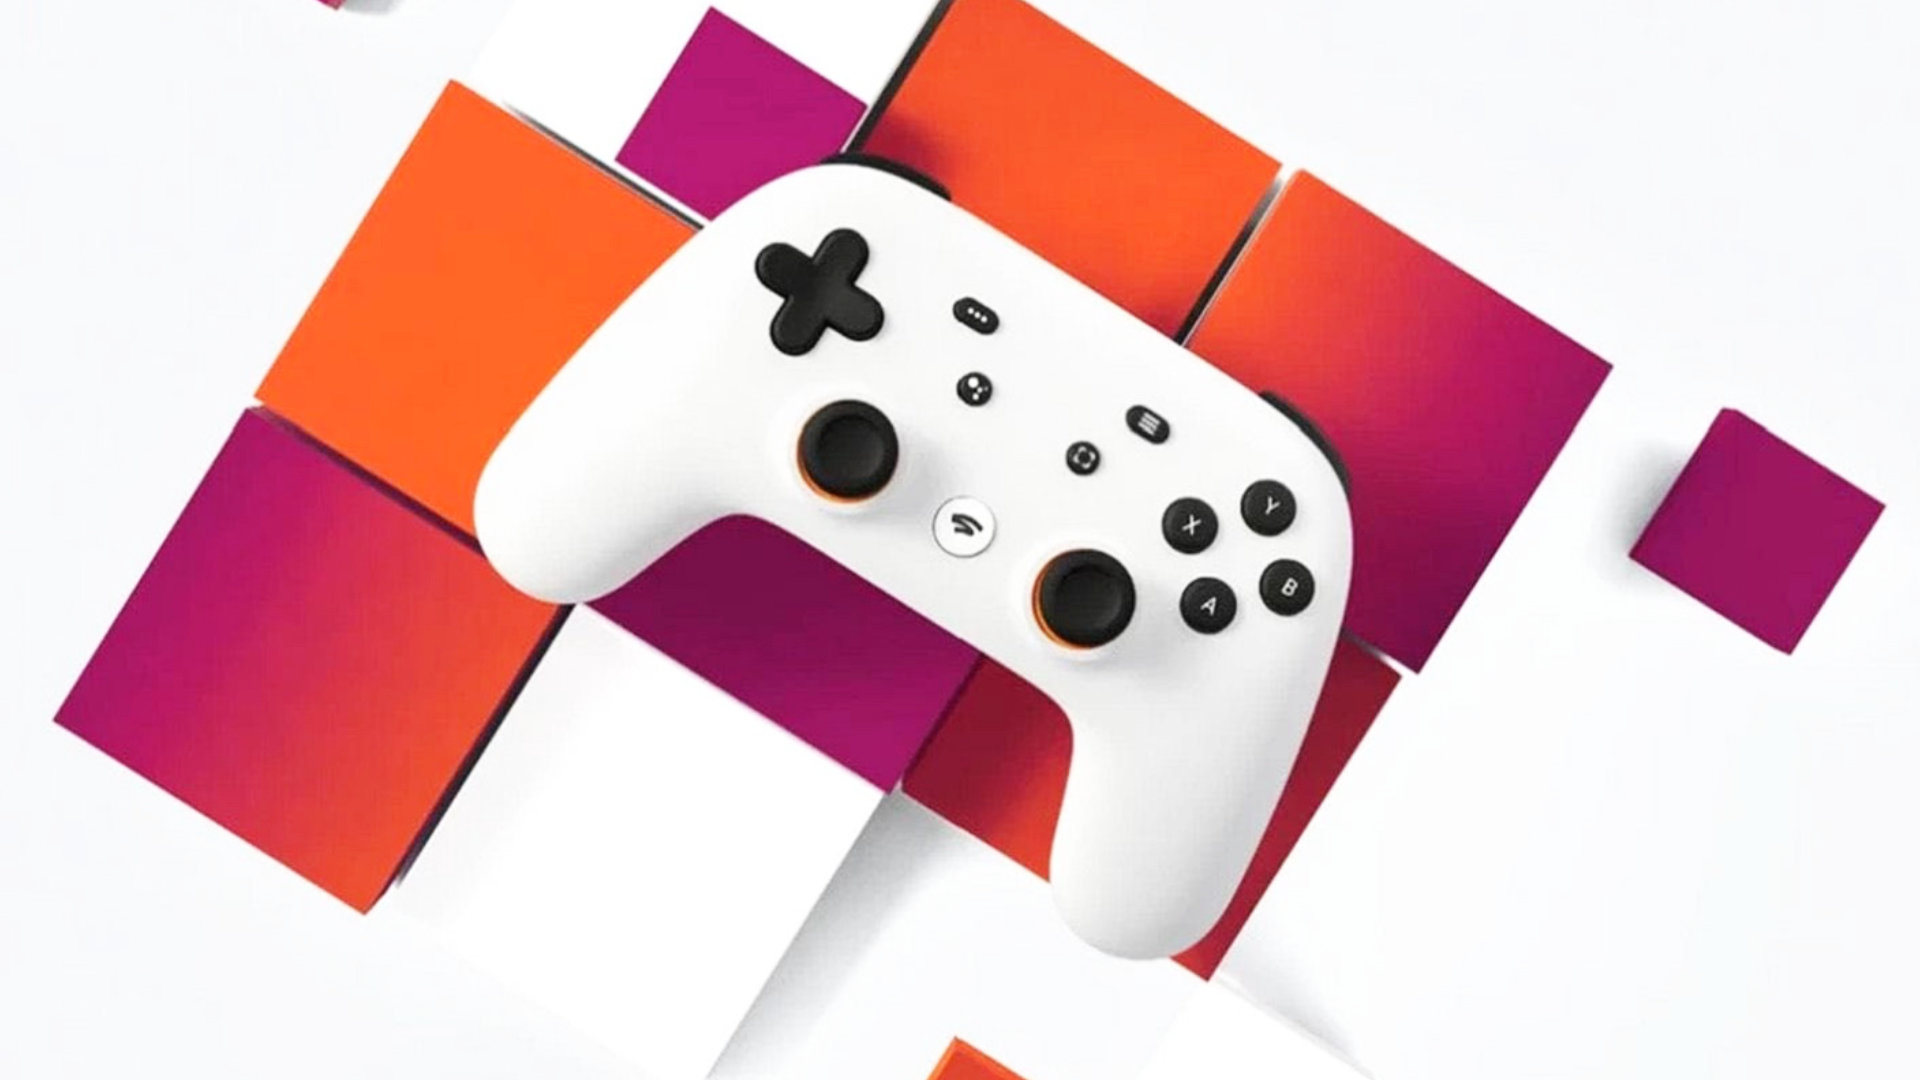 Google steps away from cloud gaming by shutting Stadia